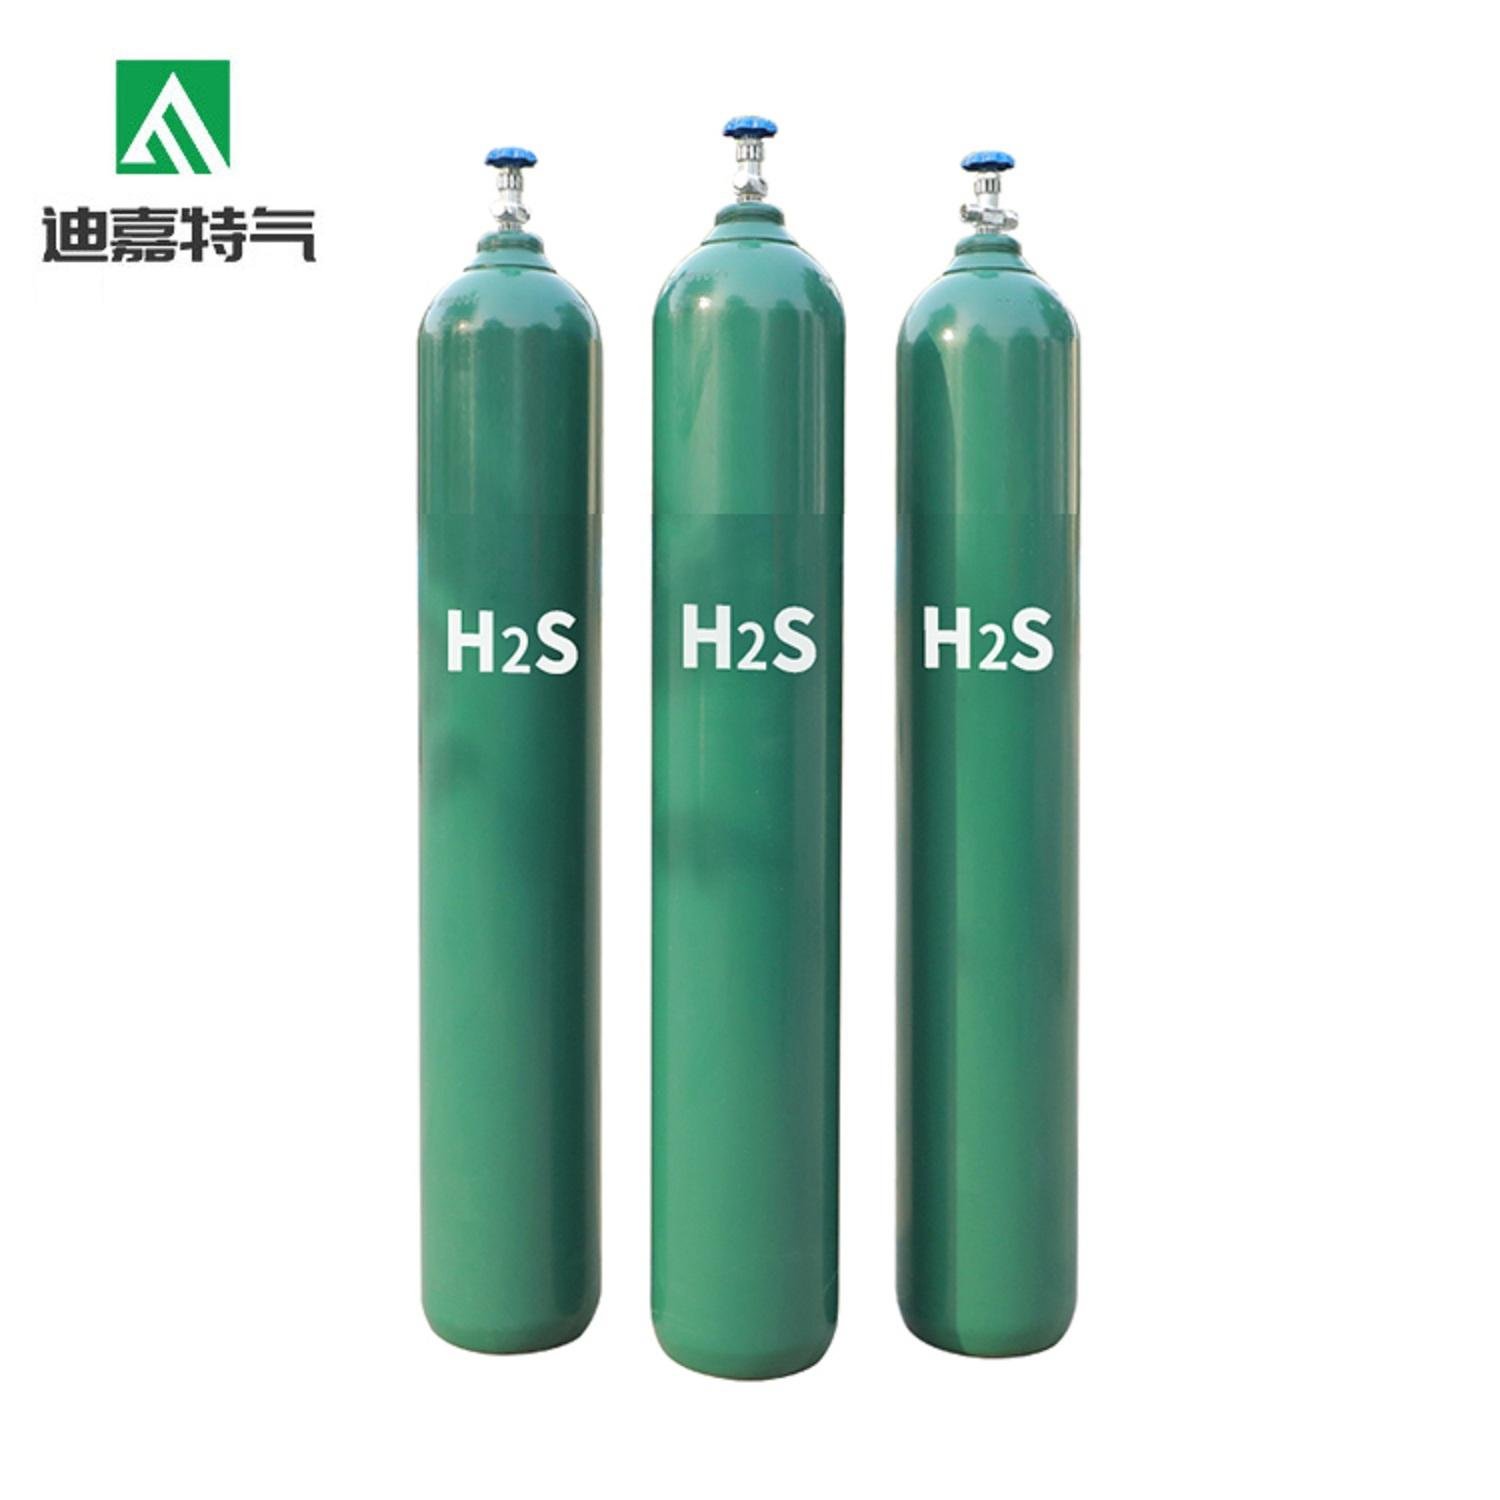 DIJIA Colorless 99.9% pure hydrogen sulfide gas H2S gas